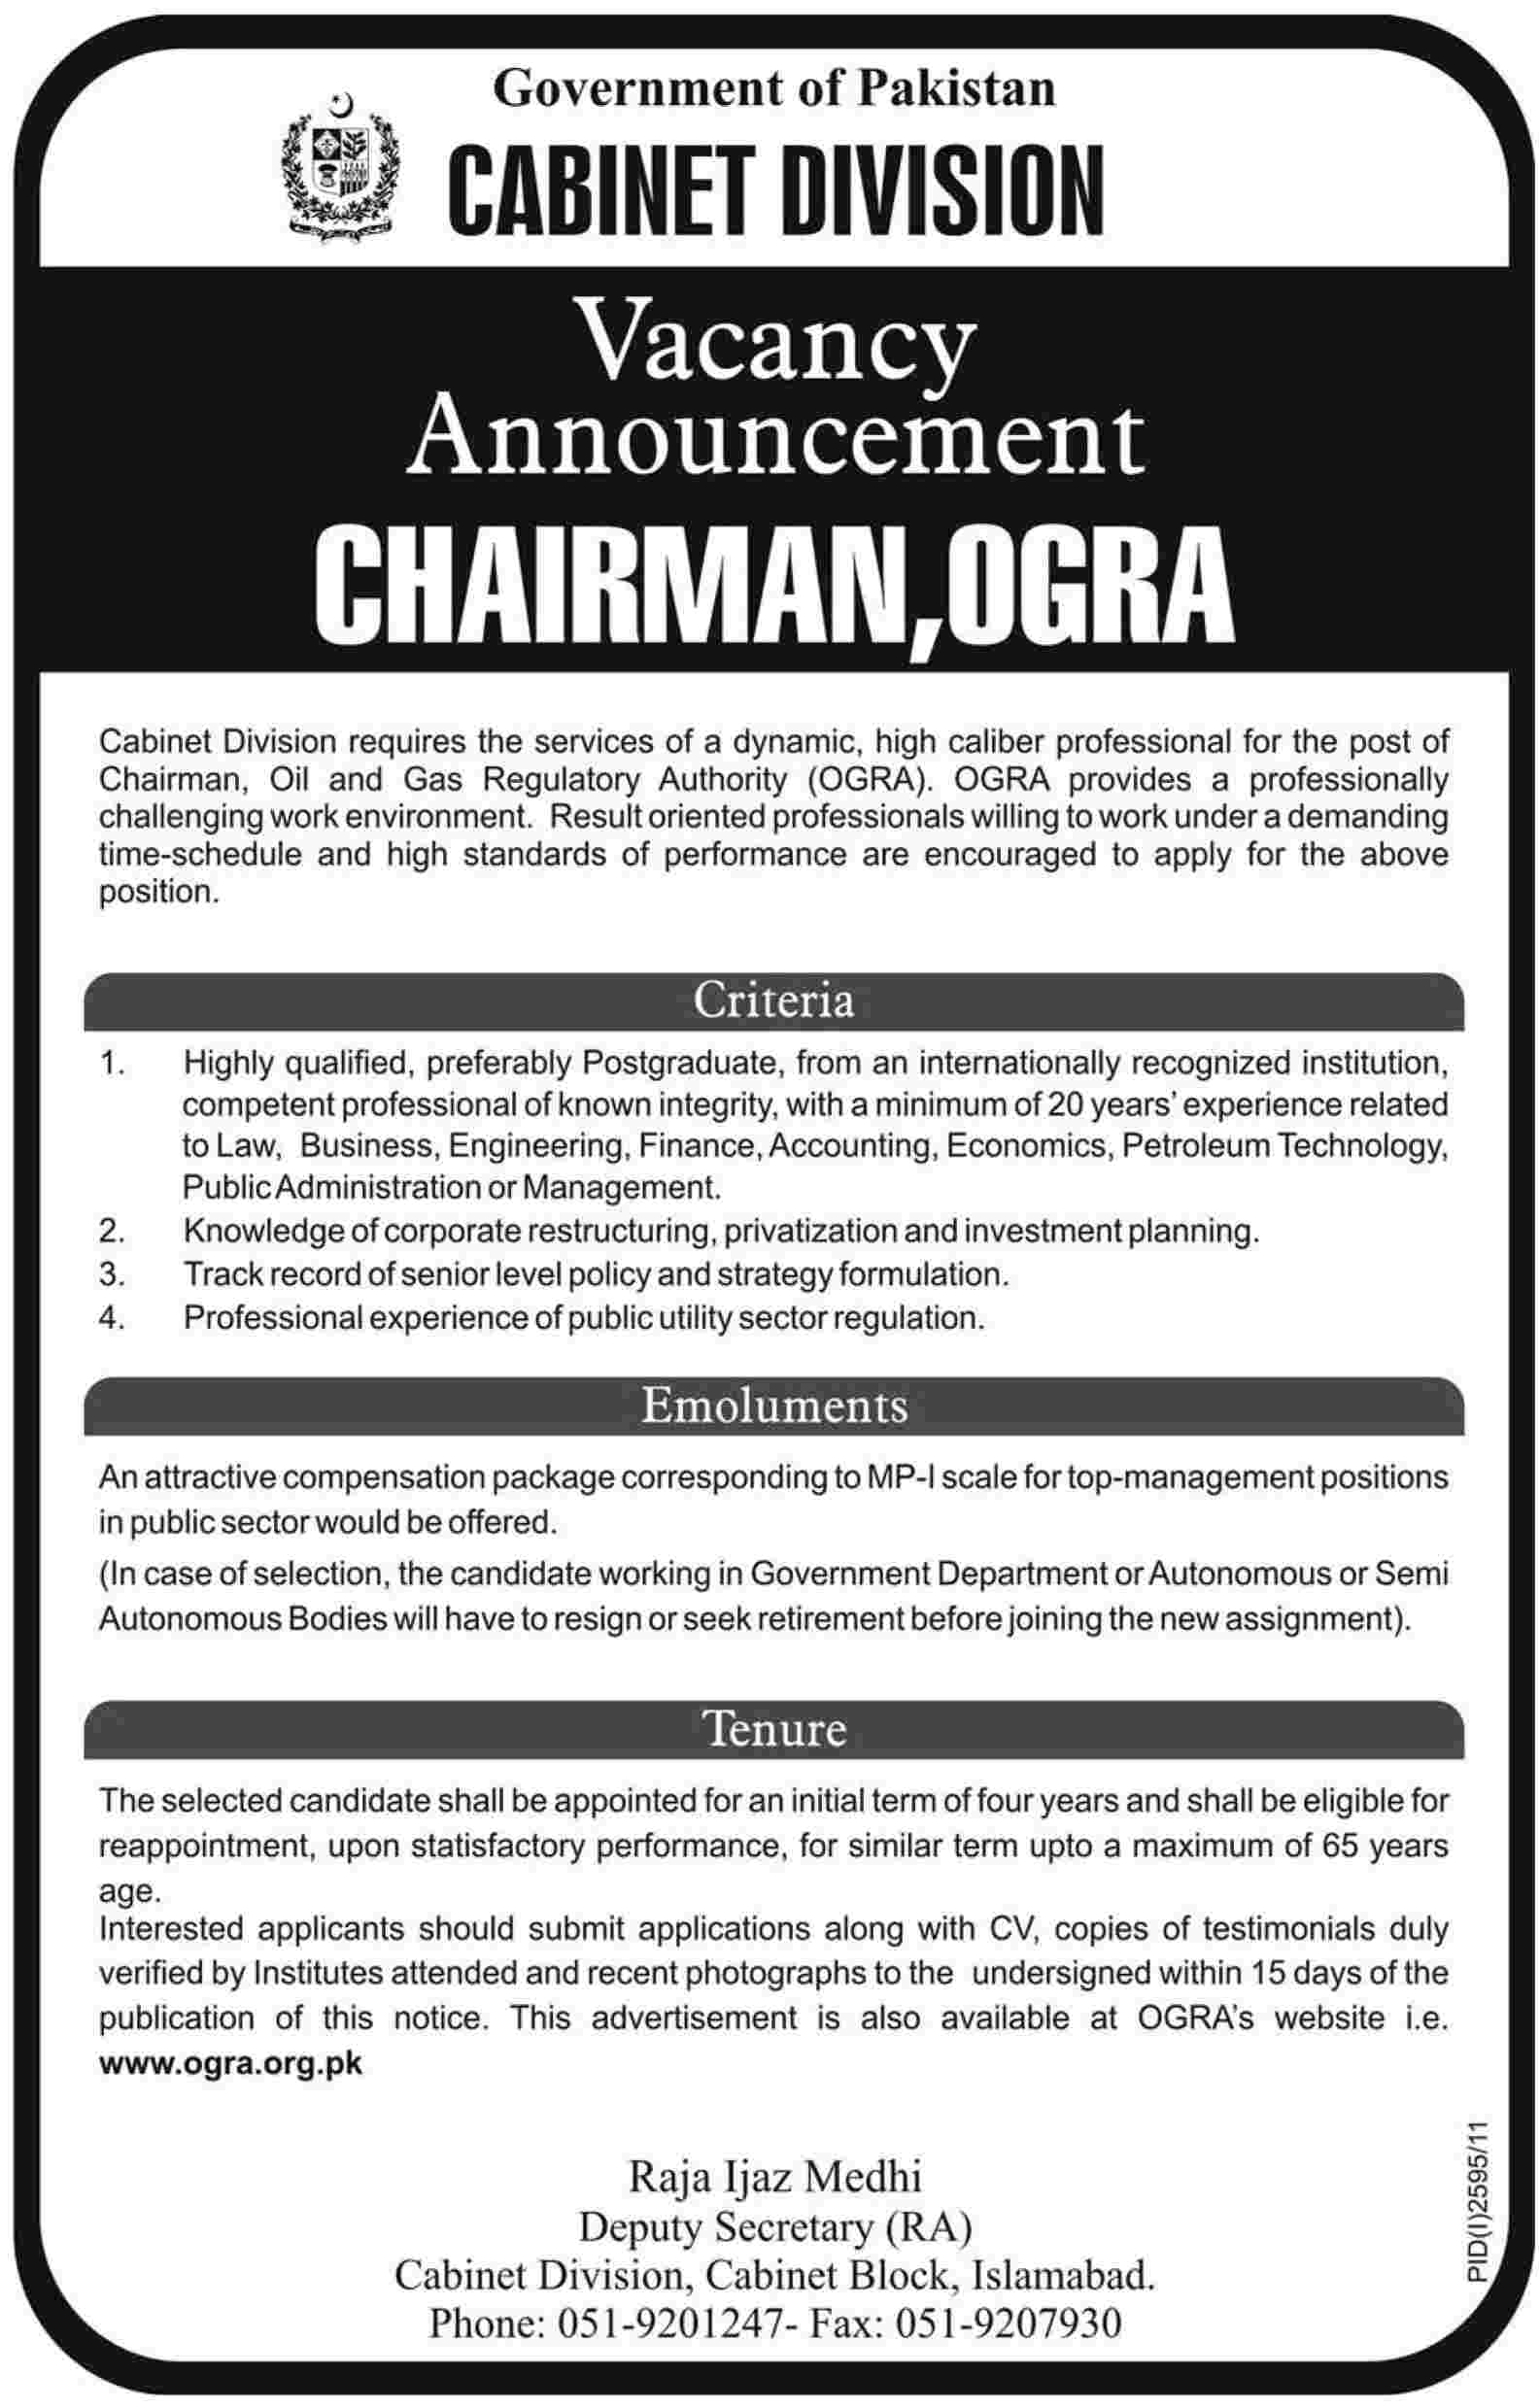 Cabinet Division Required the Services of Chairman OGRA